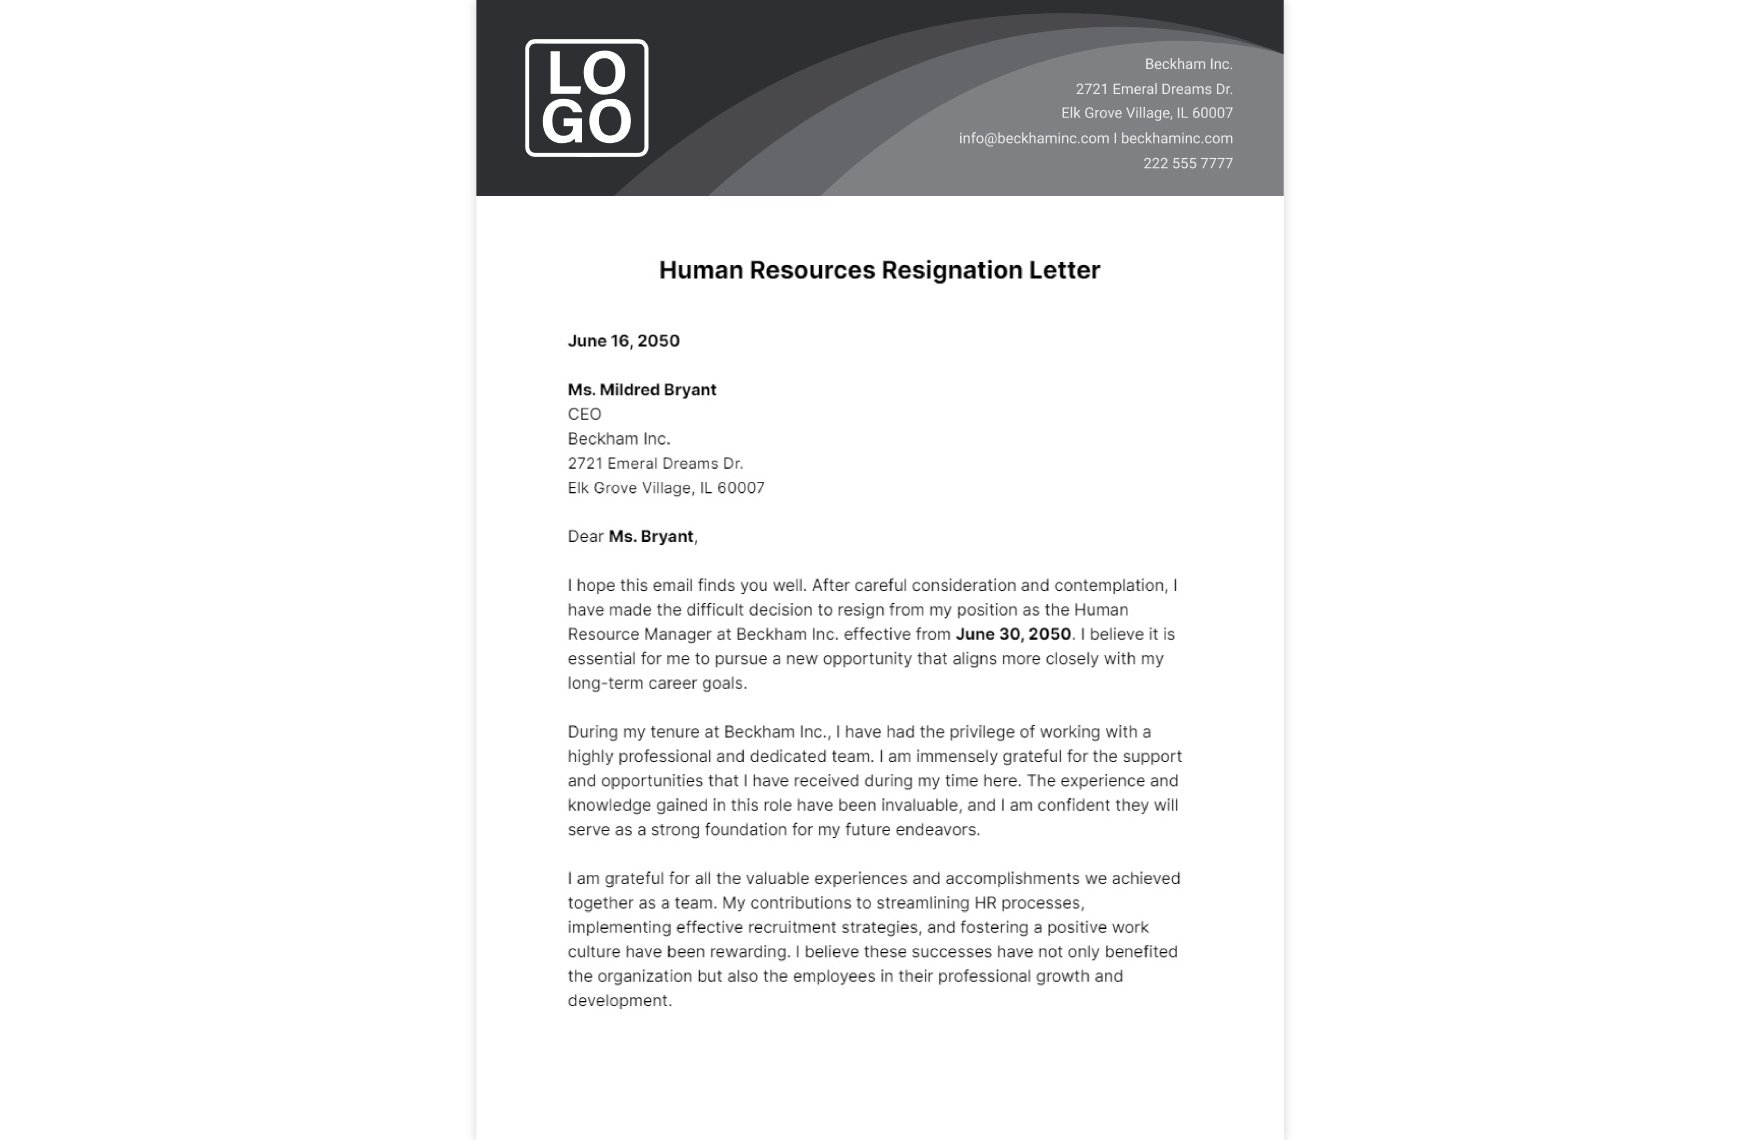 Human Resources Resignation Letter Template